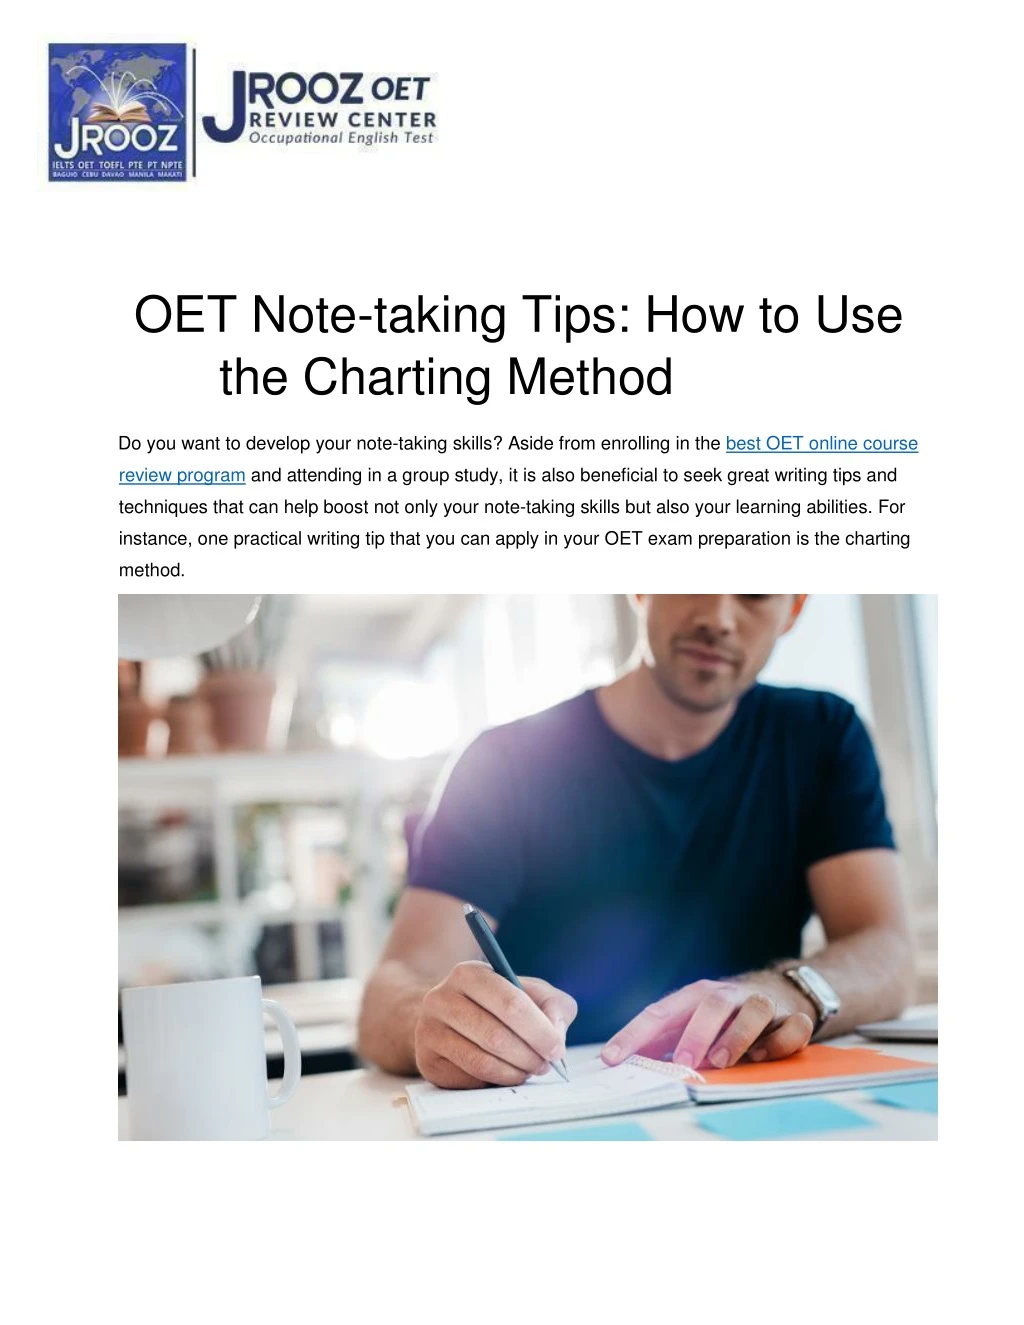 oet note taking tips how to use the charting